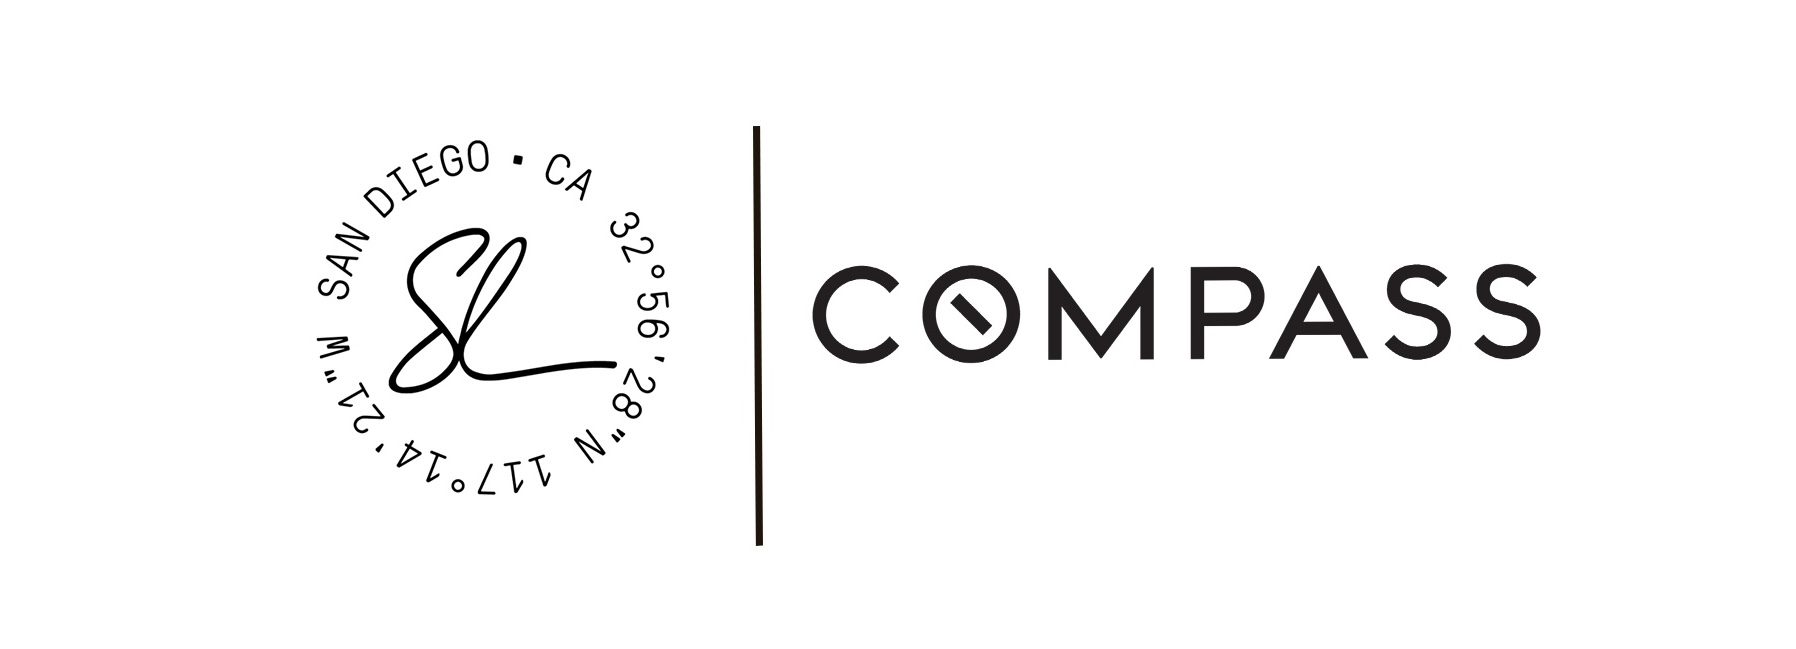 A text banner with the word COMPASS